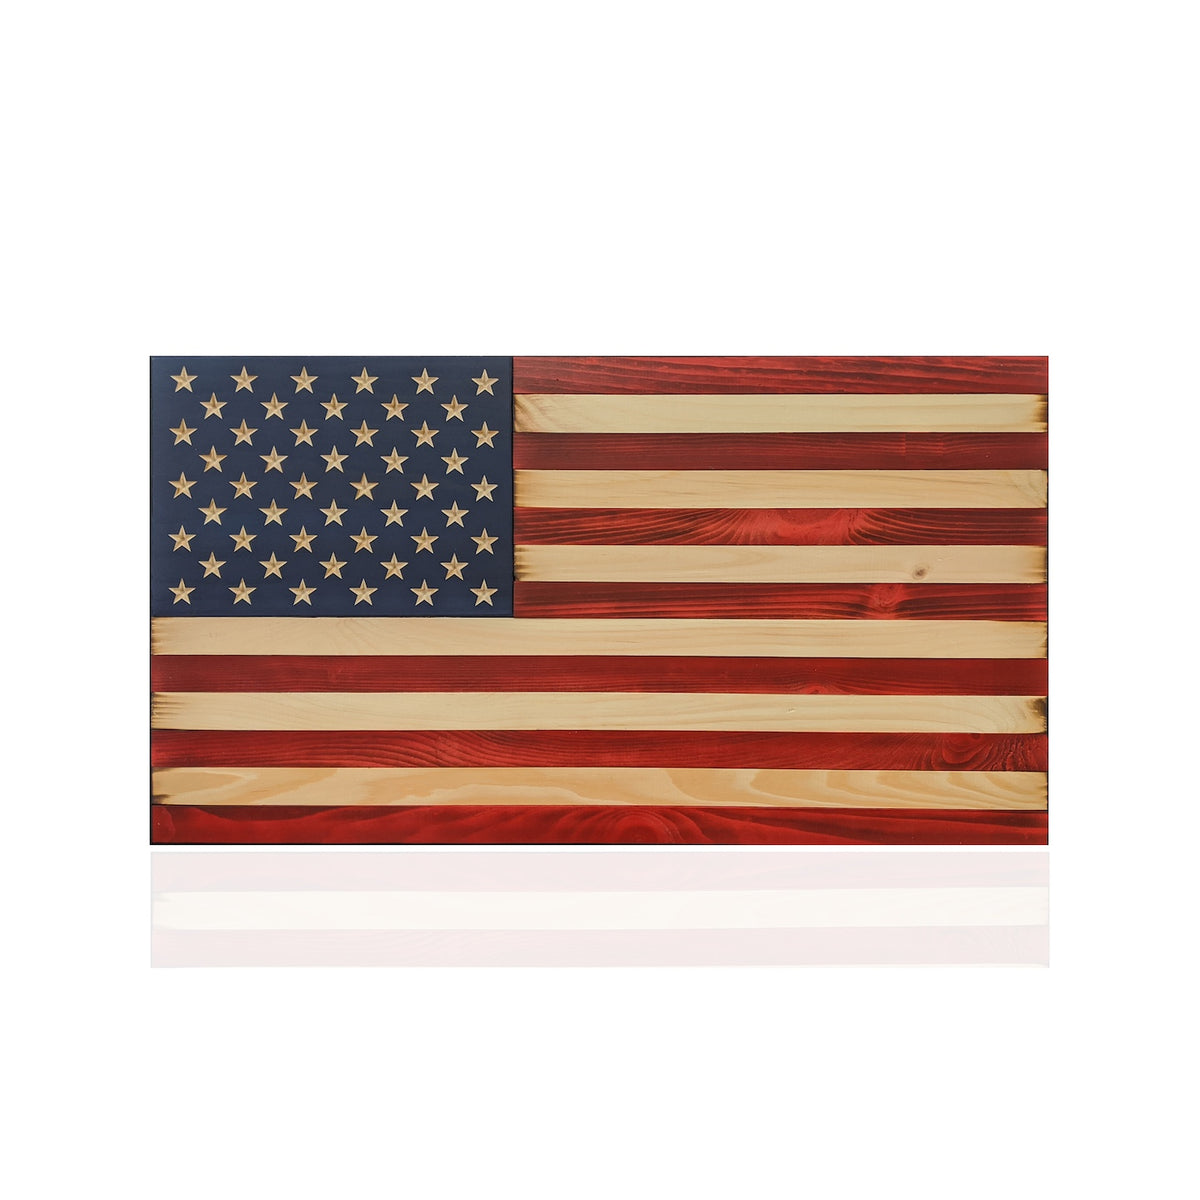 Small Wooden American Flag | Old Glory Wood American Flag Decor